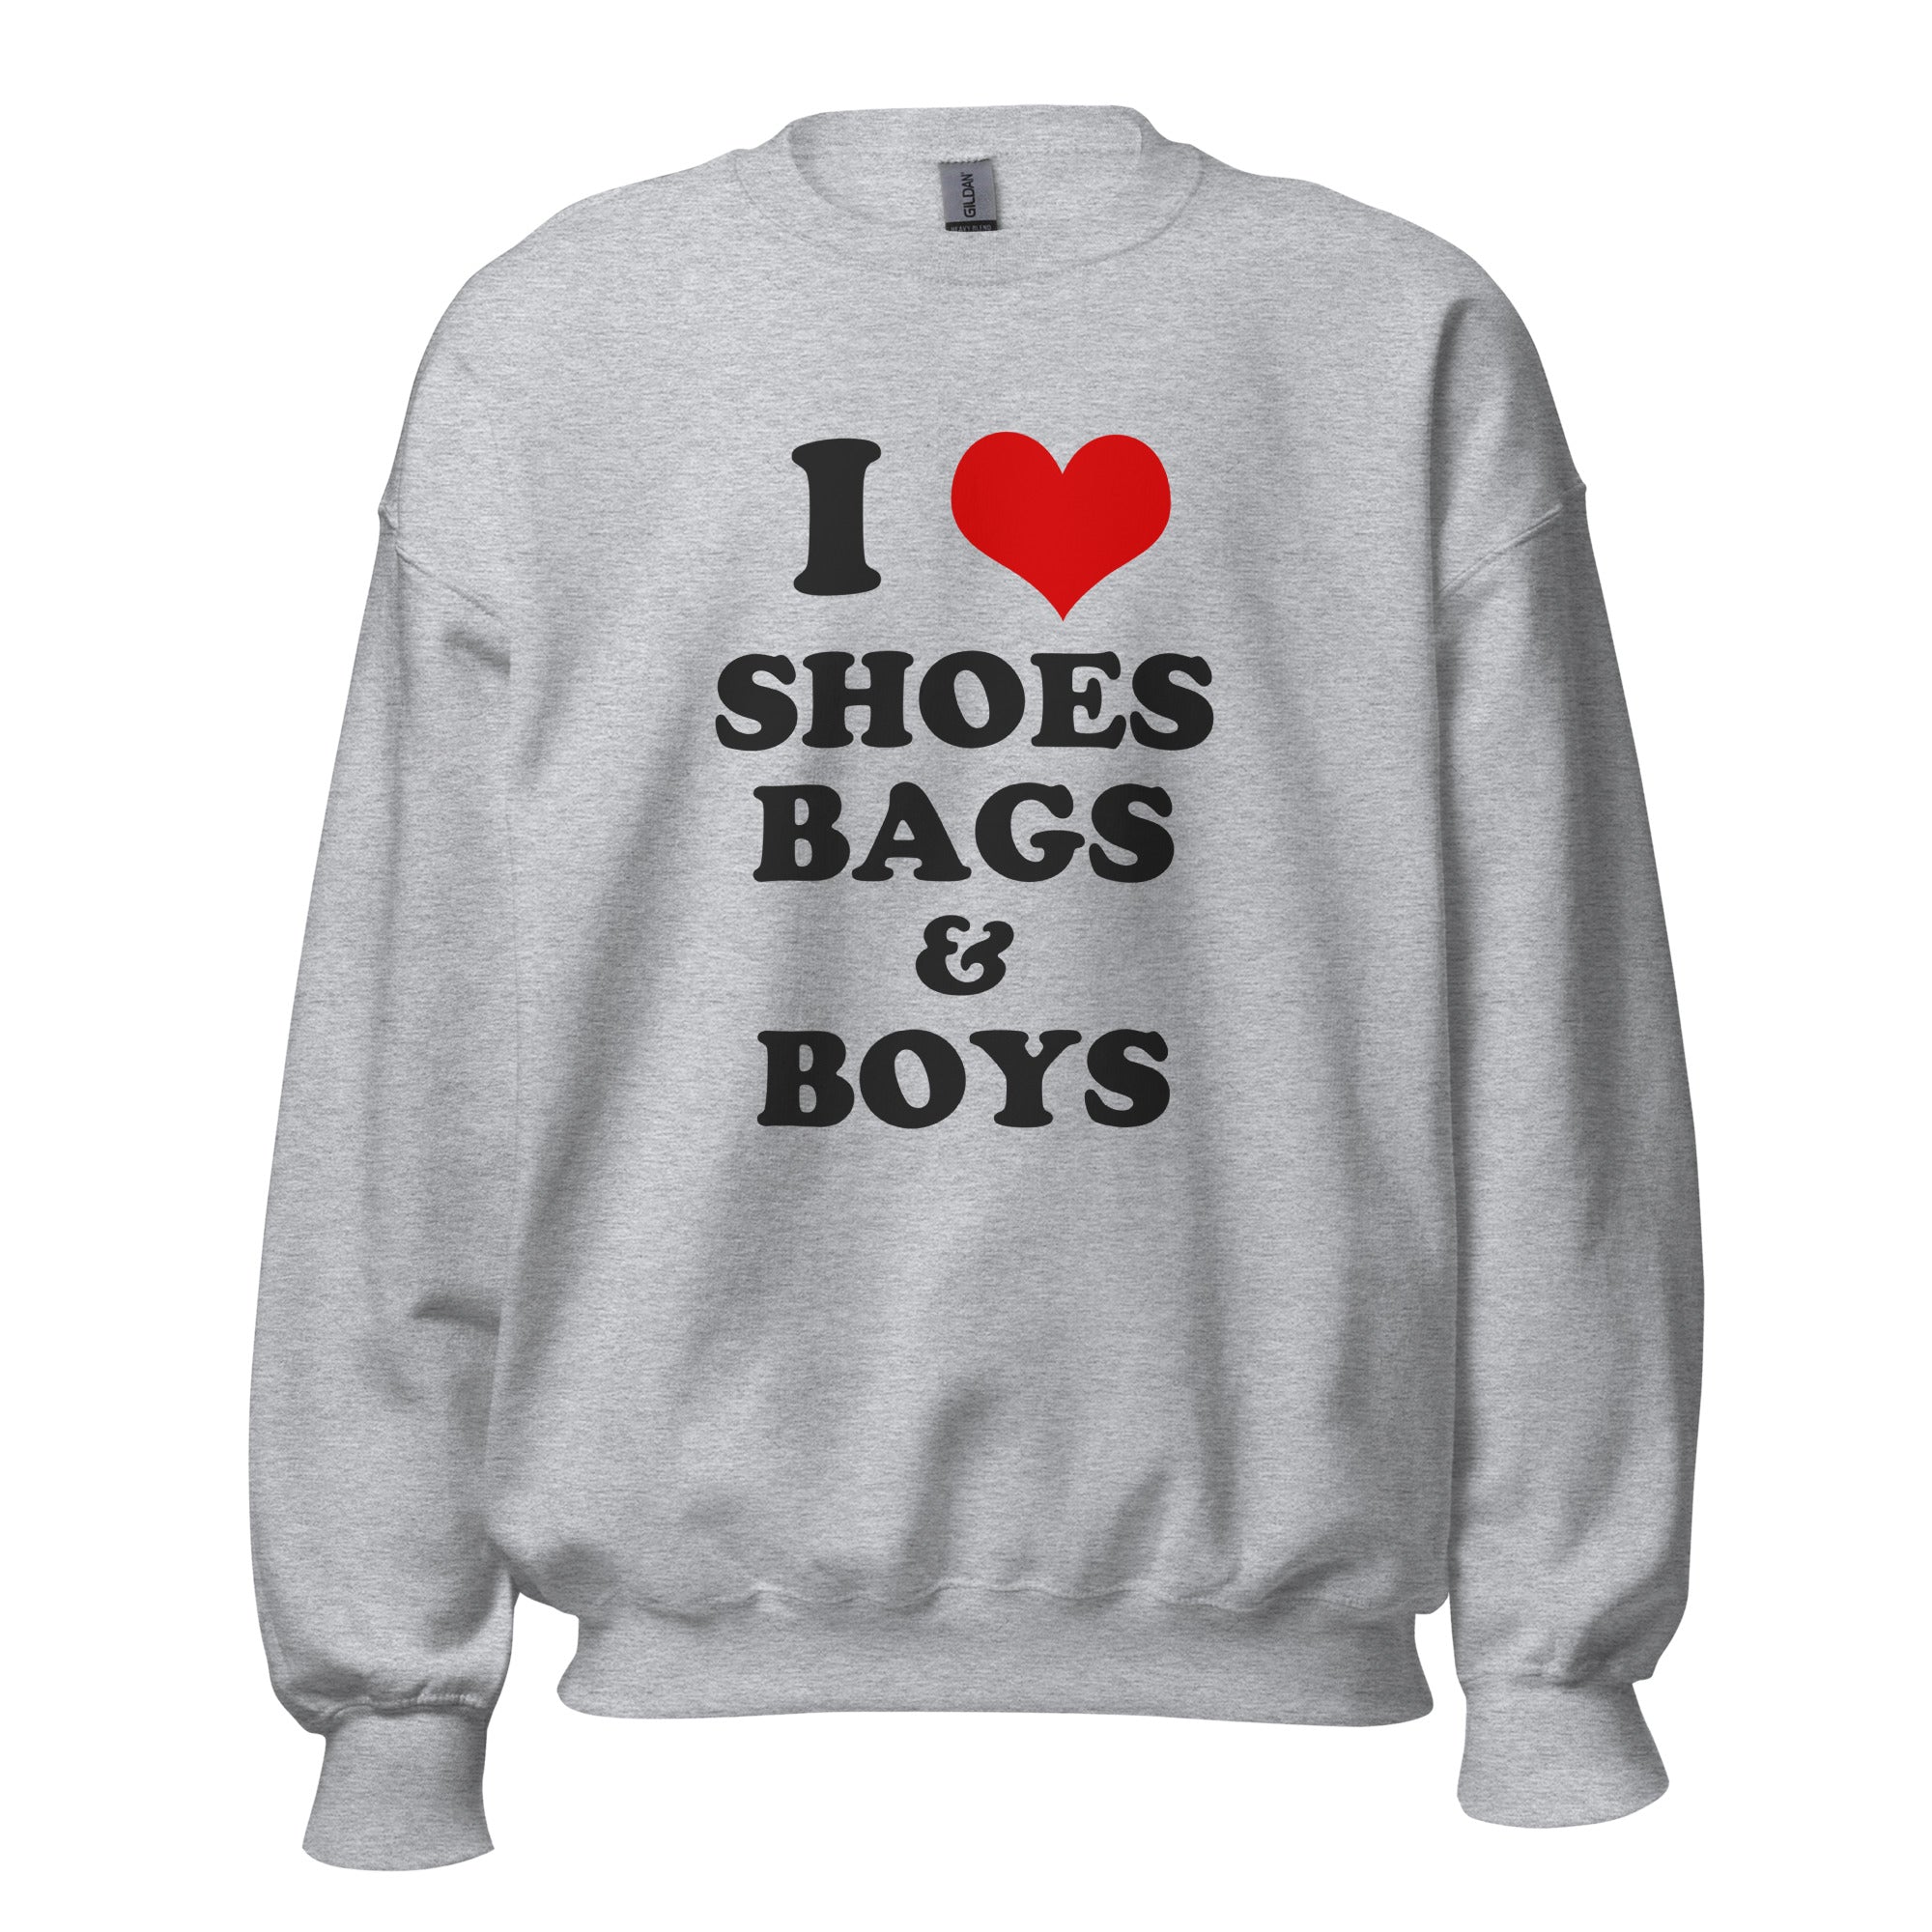 Women's Crew Neck Sweatshirt - I Love Shoes Bags and Boys - GRAPHIC T-SHIRTS